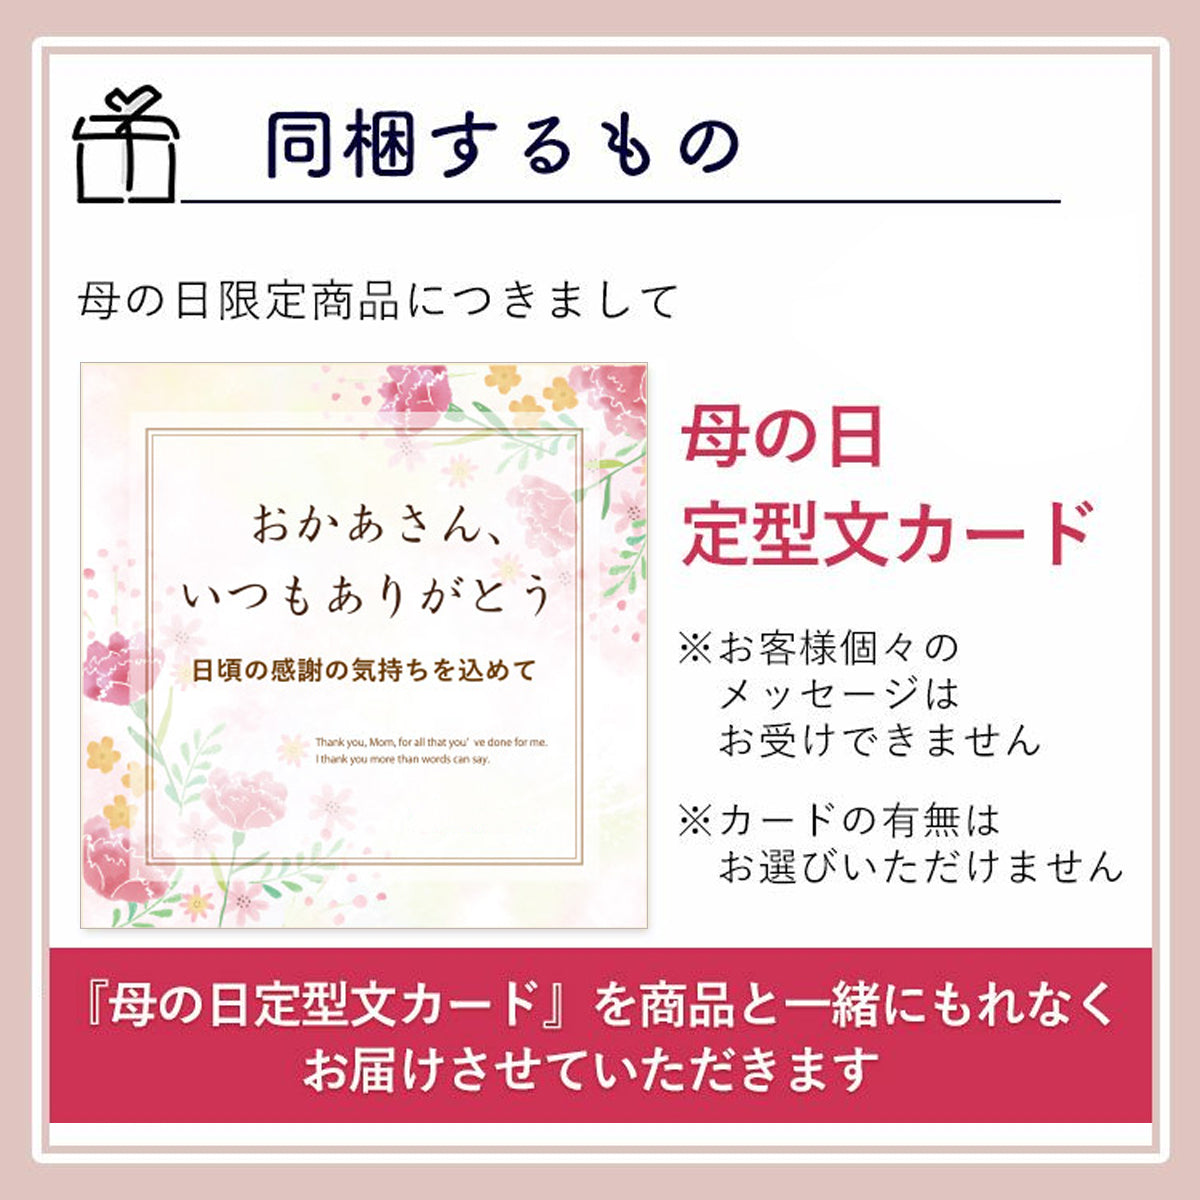 【Mother's Day Special】Midi Orchid & Sweet Potato Sweets Set